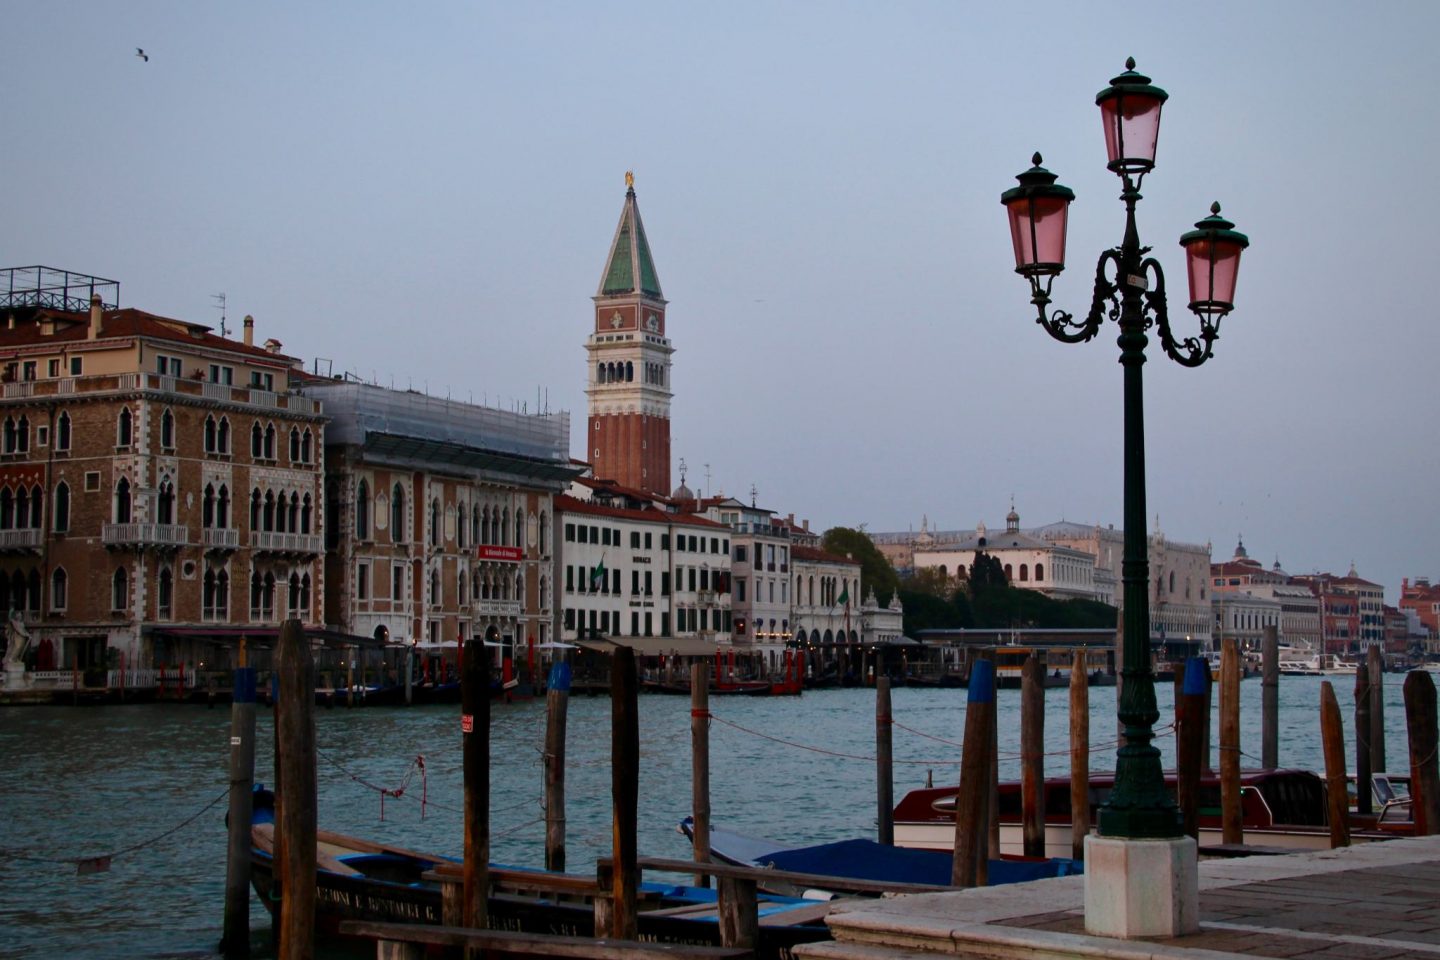 Venice Travel Guide with St. Mark's Square ... The Spectacular Adventurer